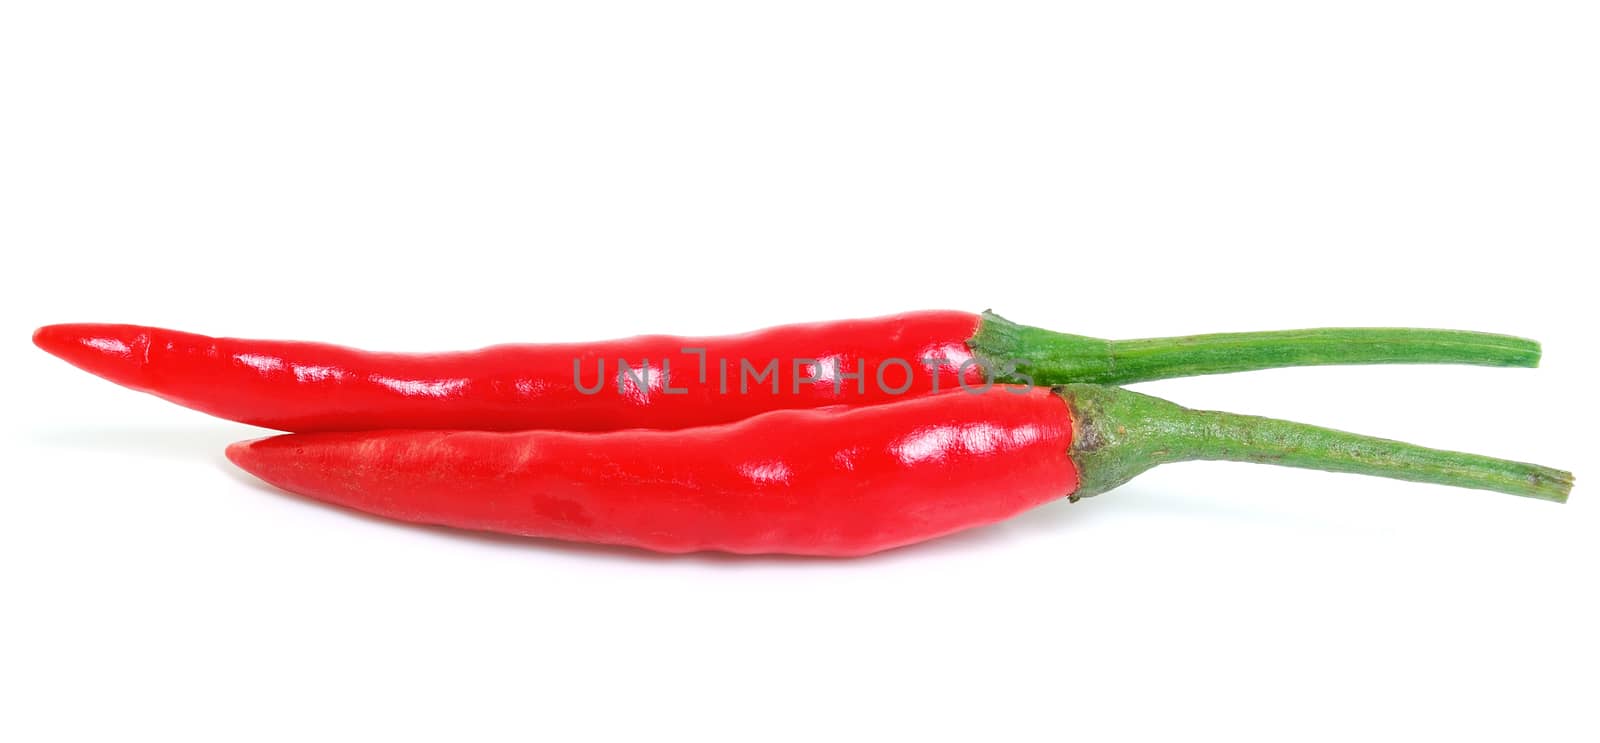 red hot chili pepper isolated on a white background by sommai